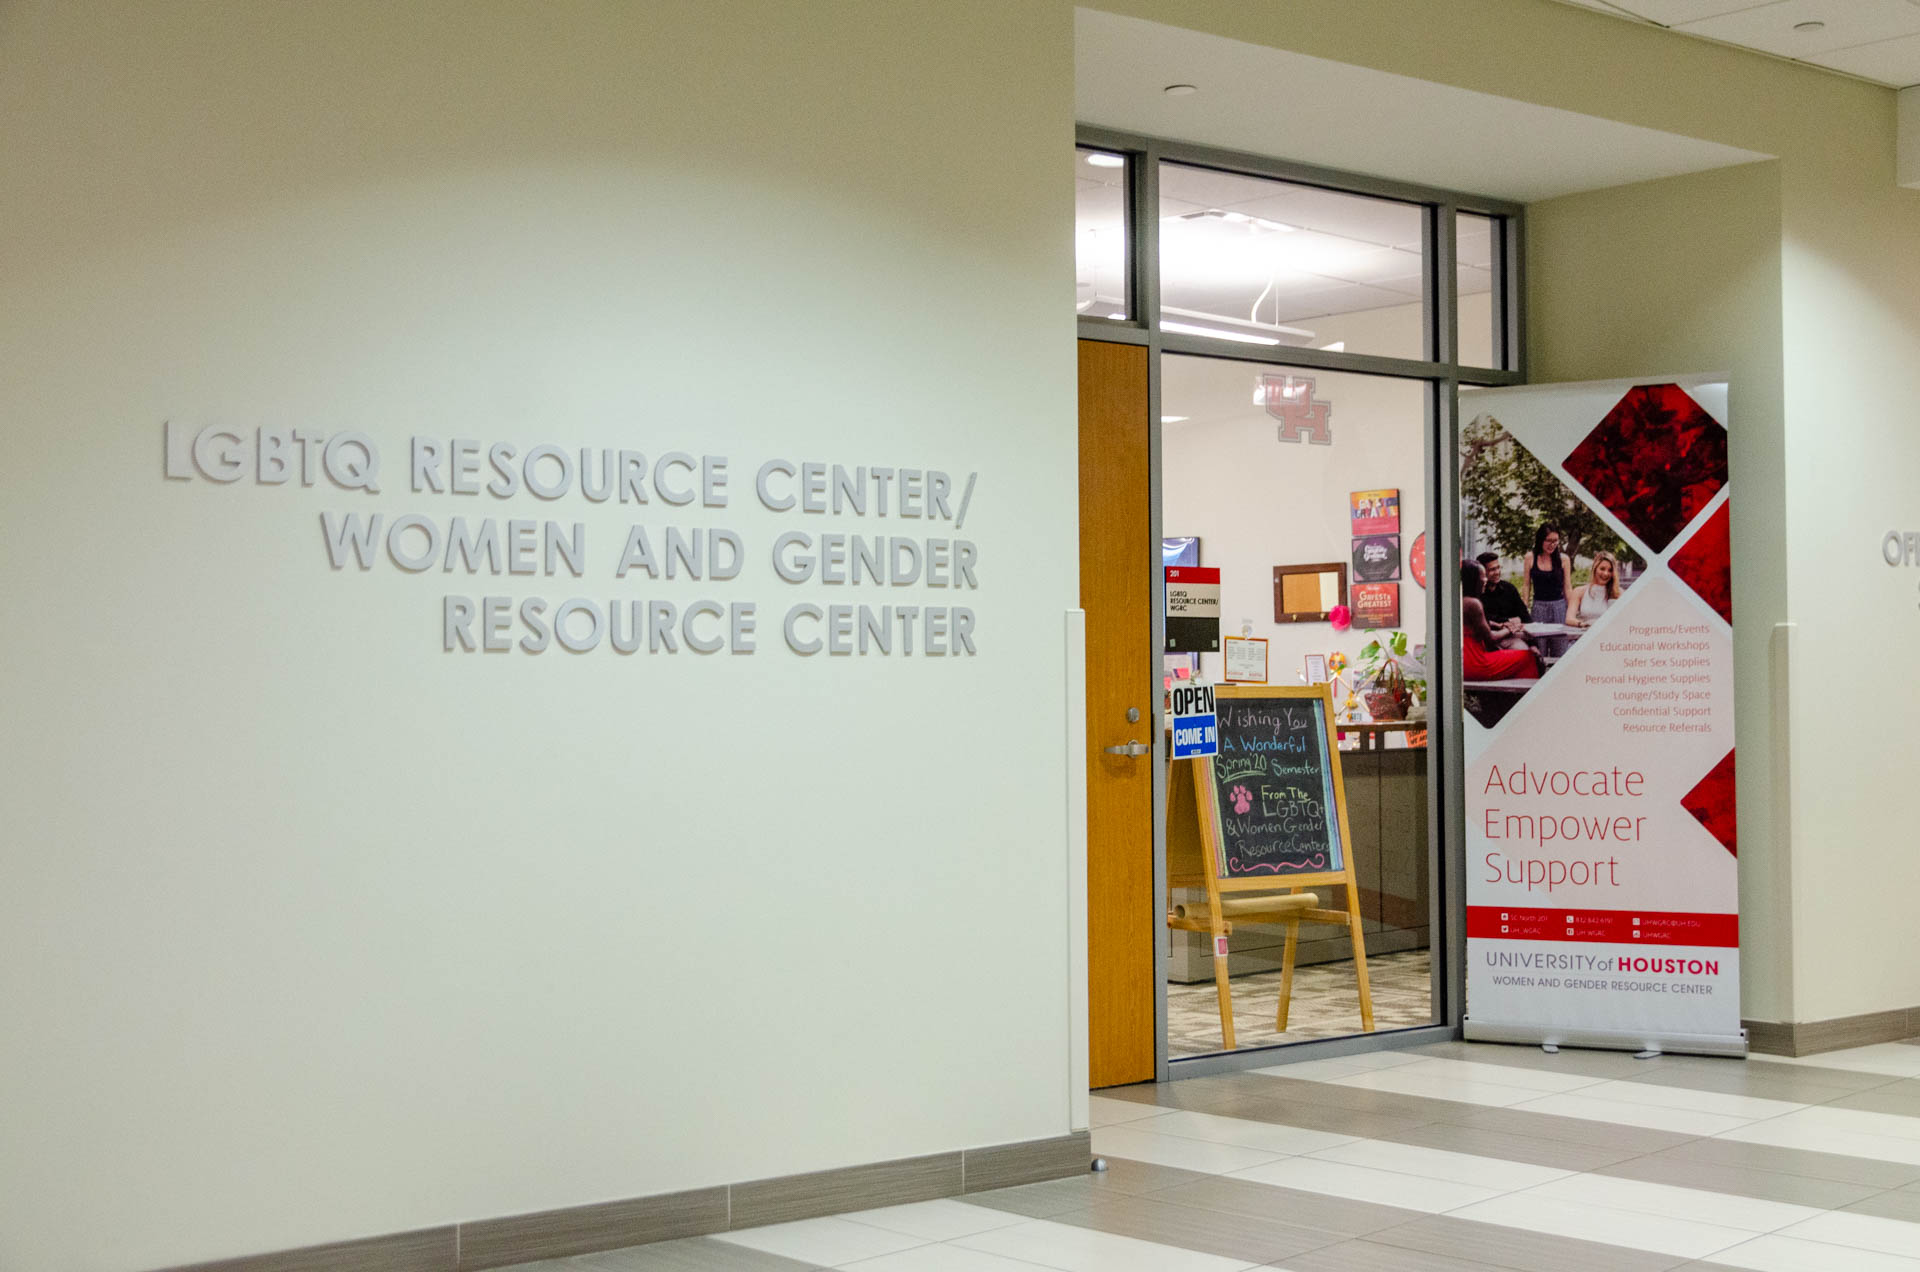 The LGBTQ Resource Center shares a space with the Women and Gender Resource Center